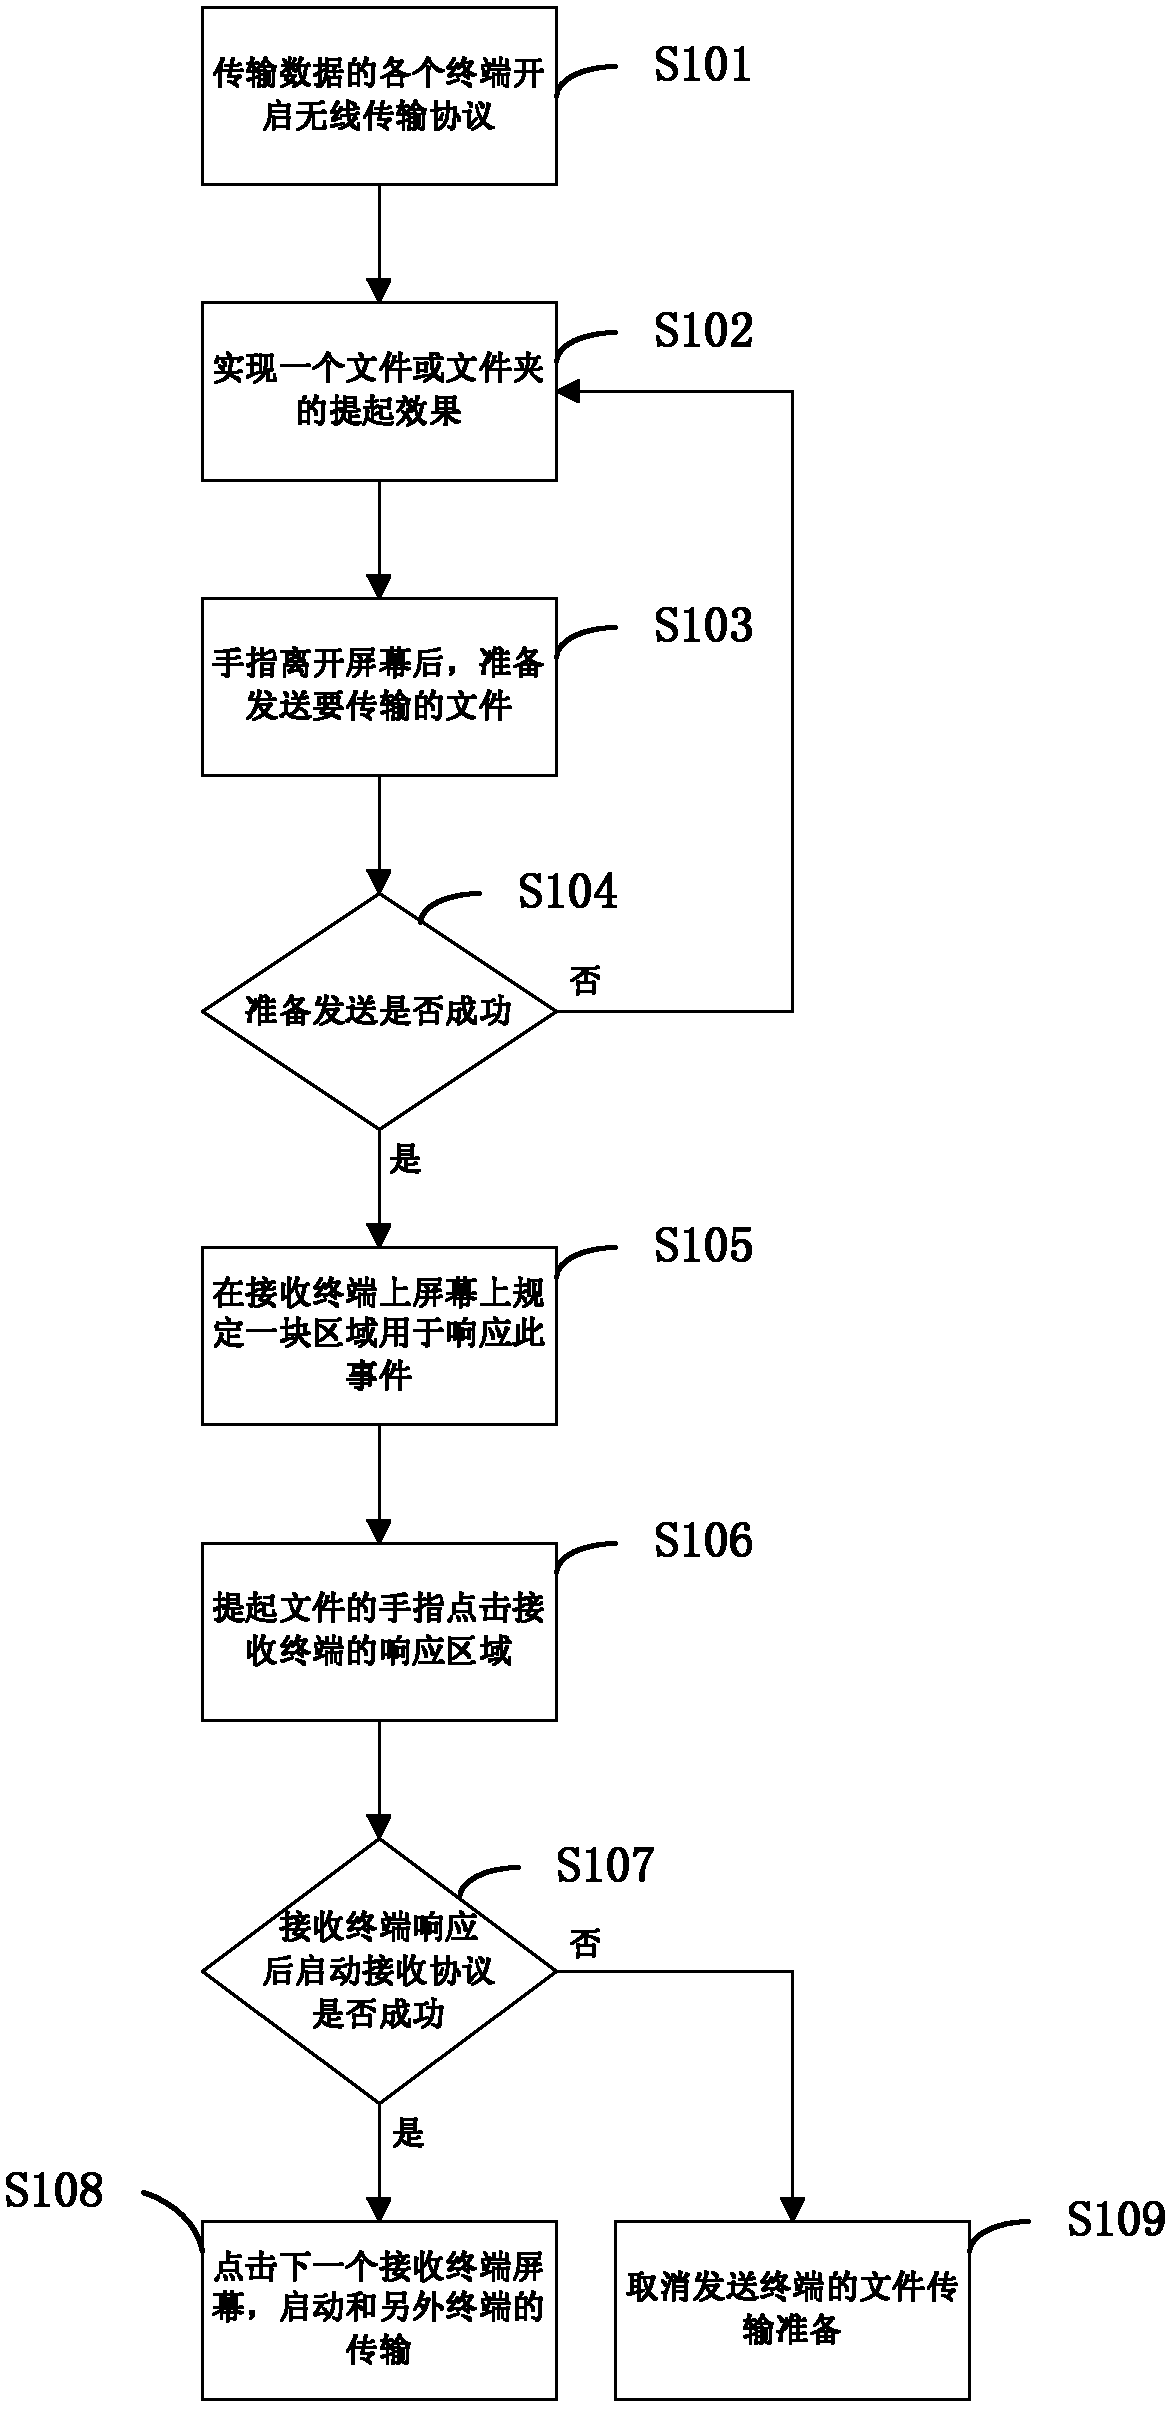 Method for transferring files among terminals